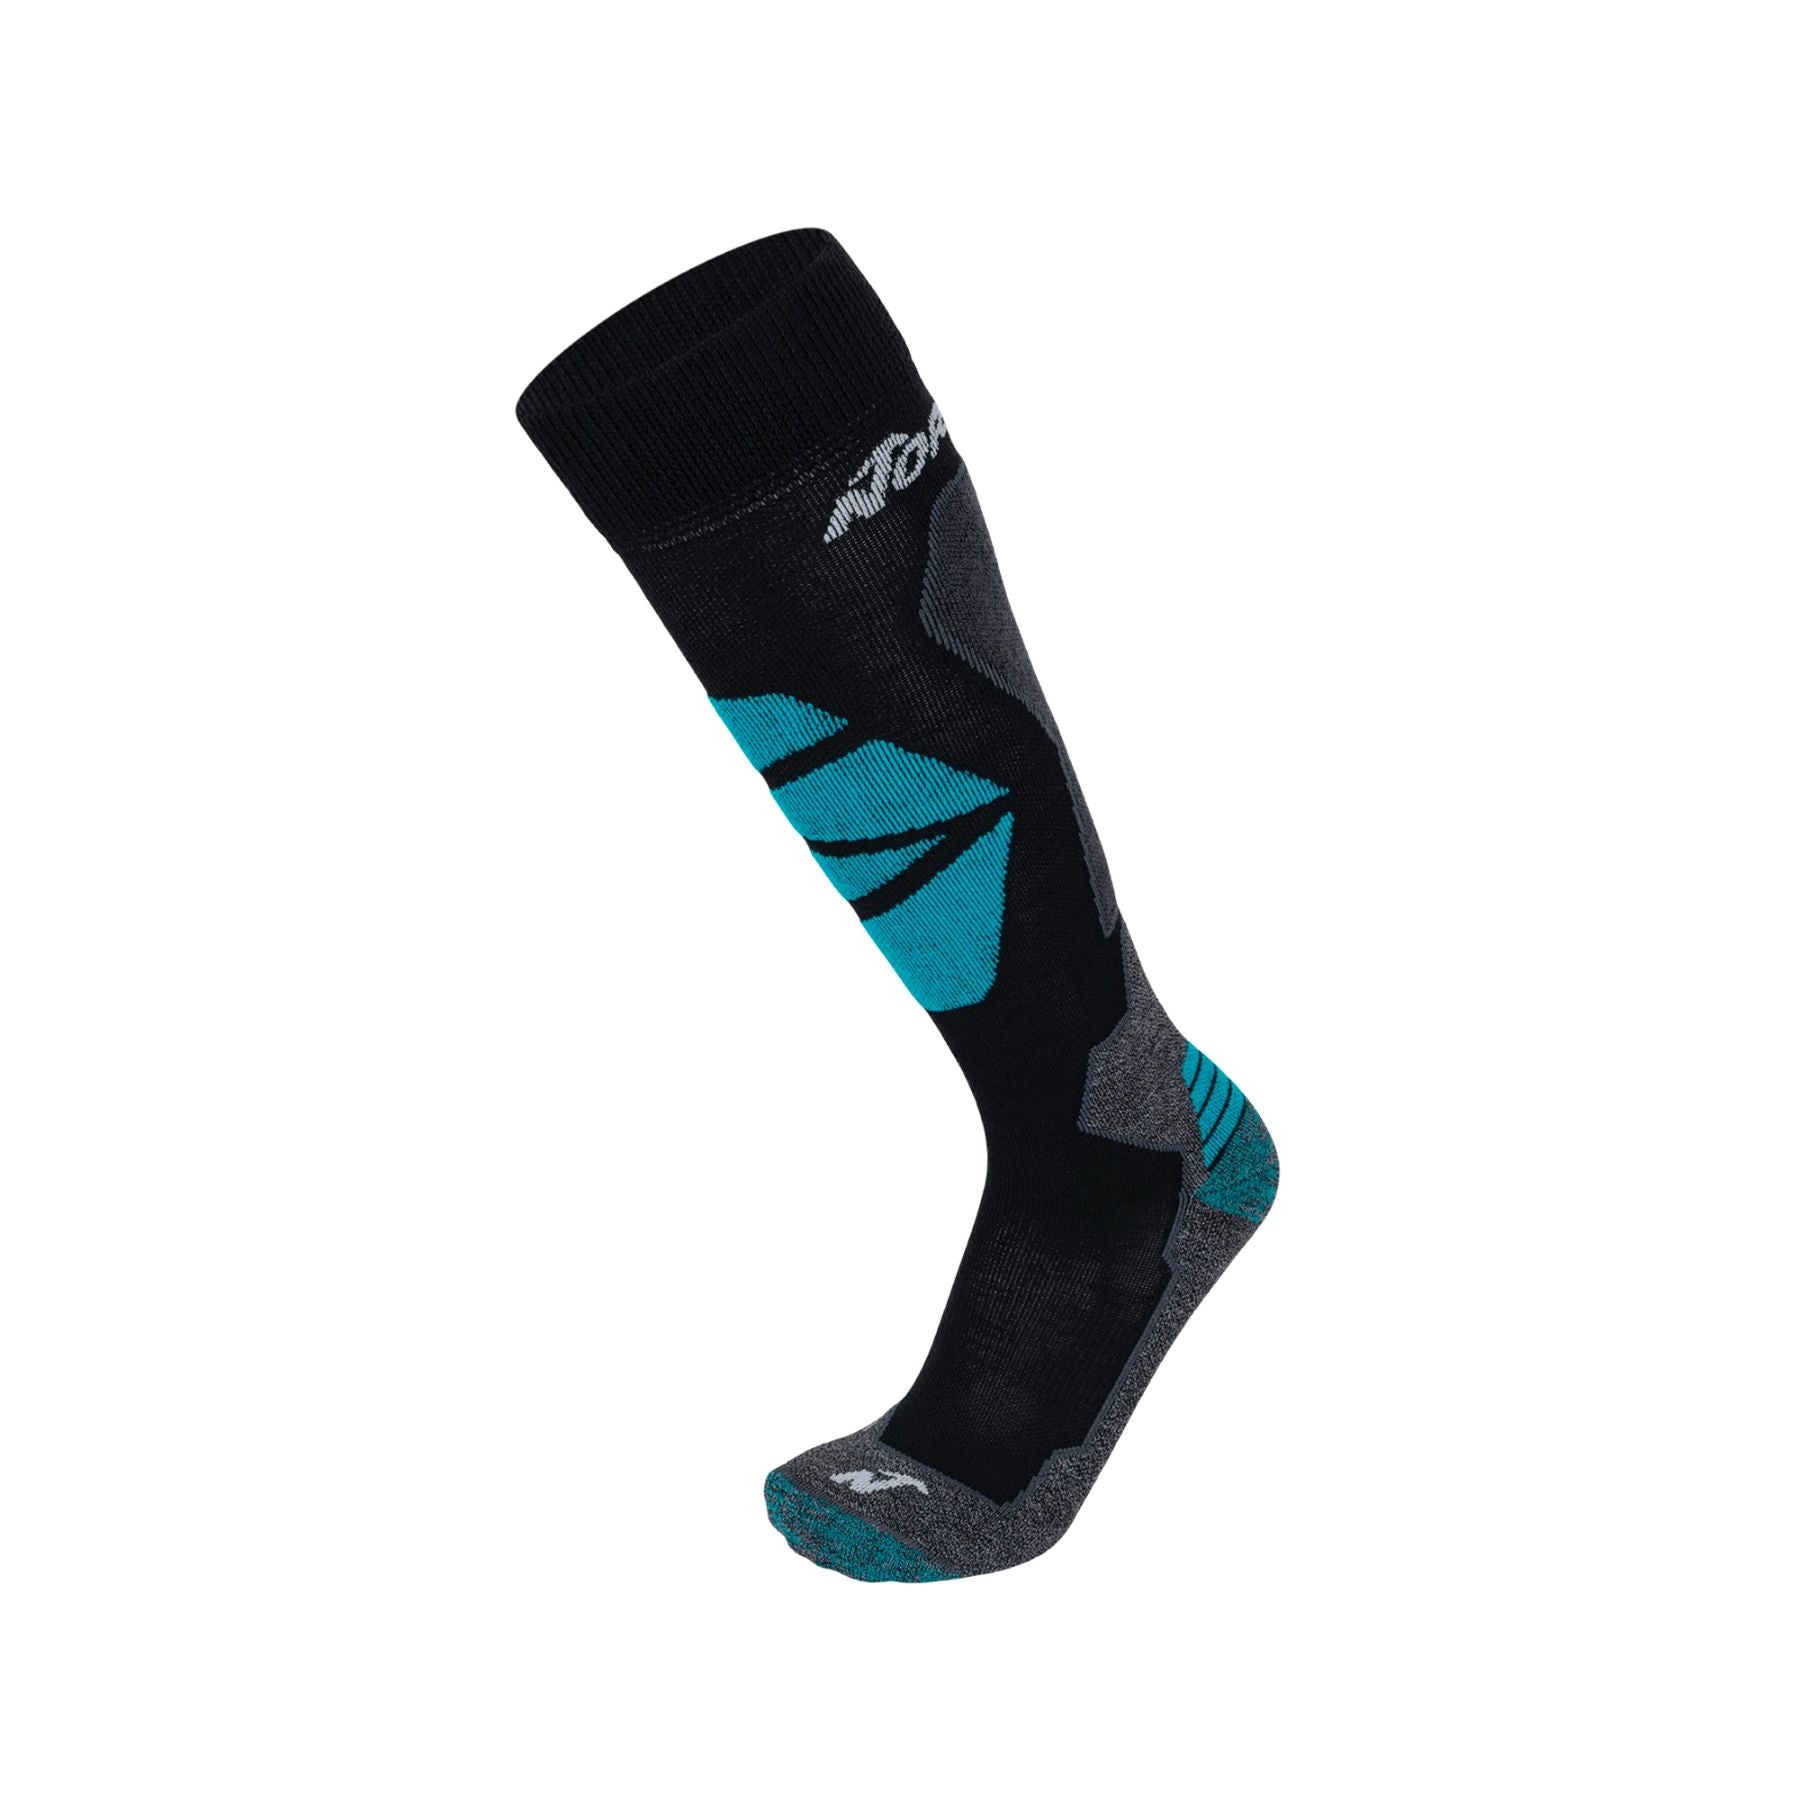 Nordica High Performance Sock in Black Turquoise